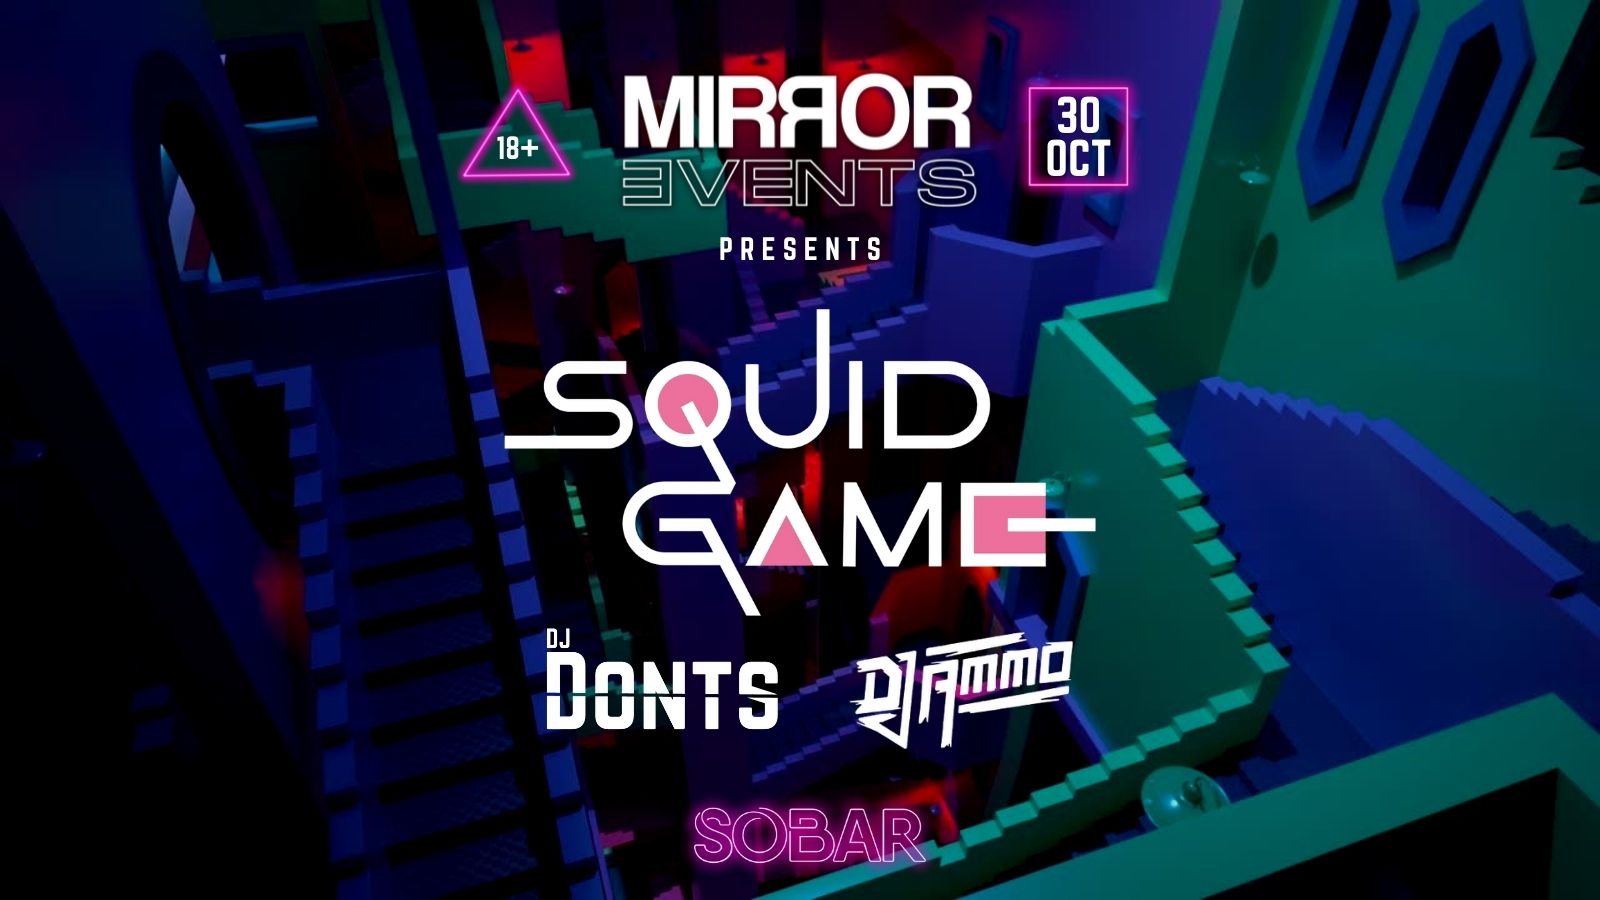 MIRROR events Presents Squid Game